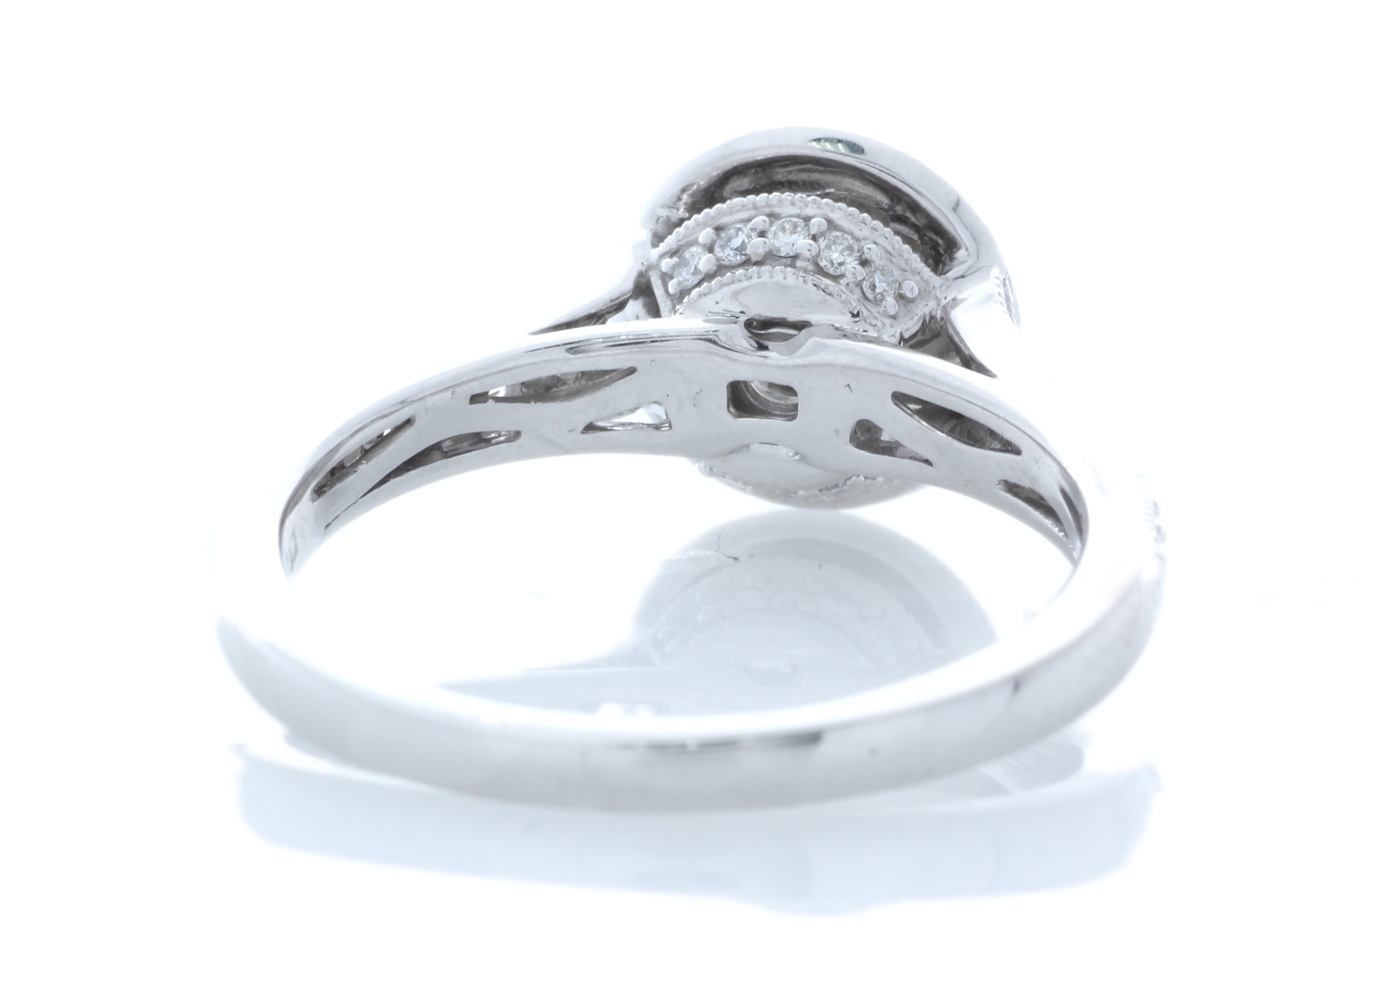 18ct White Gold Single Stone With Halo Setting Ring (0.63) 0.91 Carats - Image 3 of 5